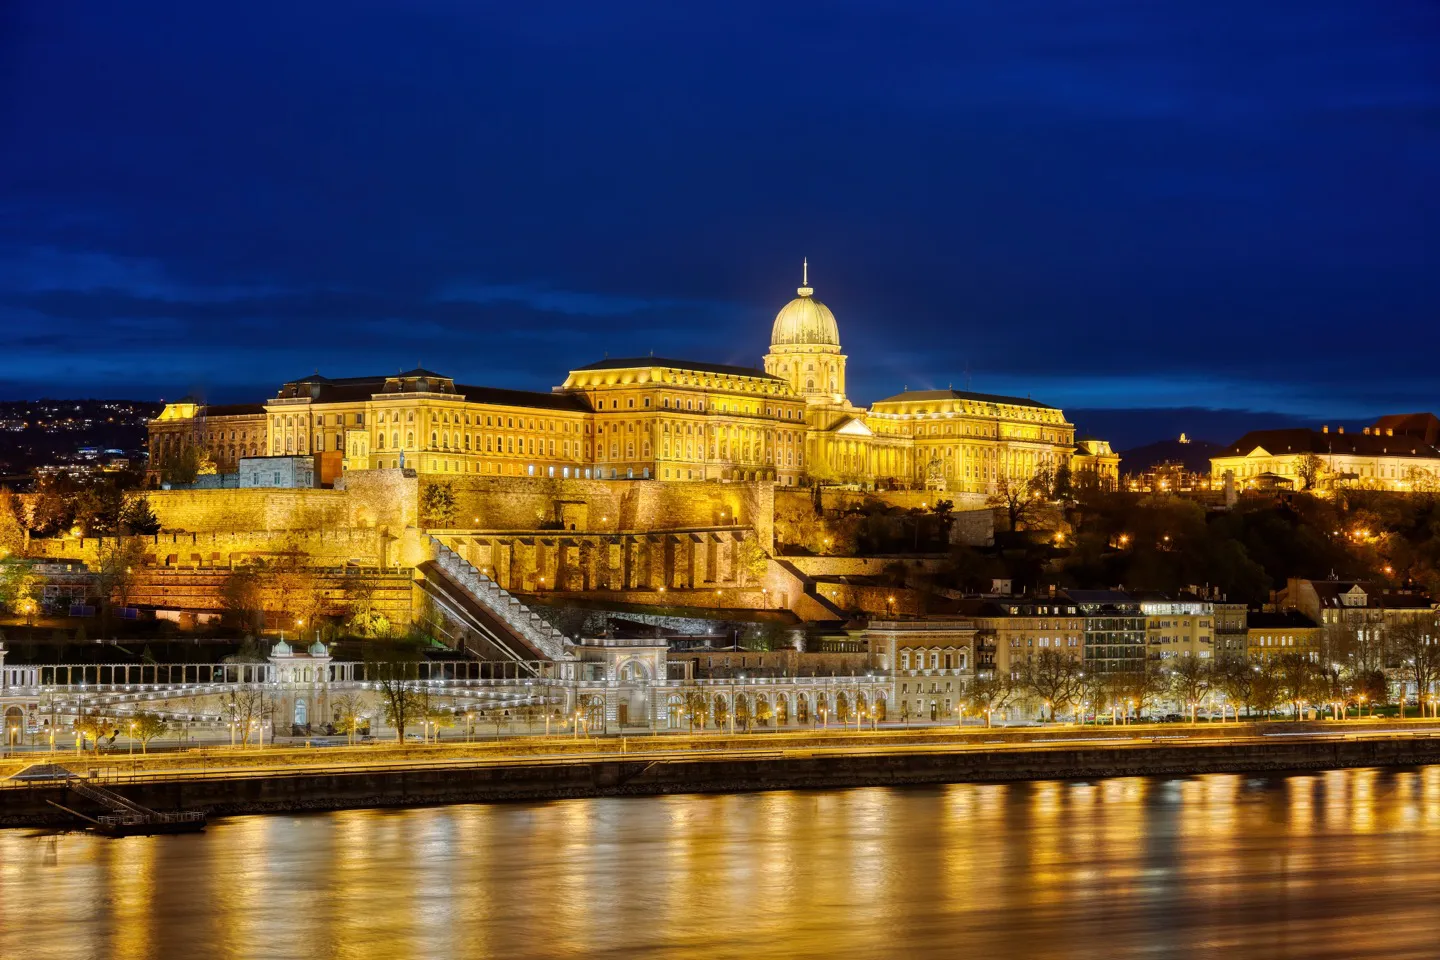 Enjoy a five-star stay and drive vacation package to Budapest, Hungary